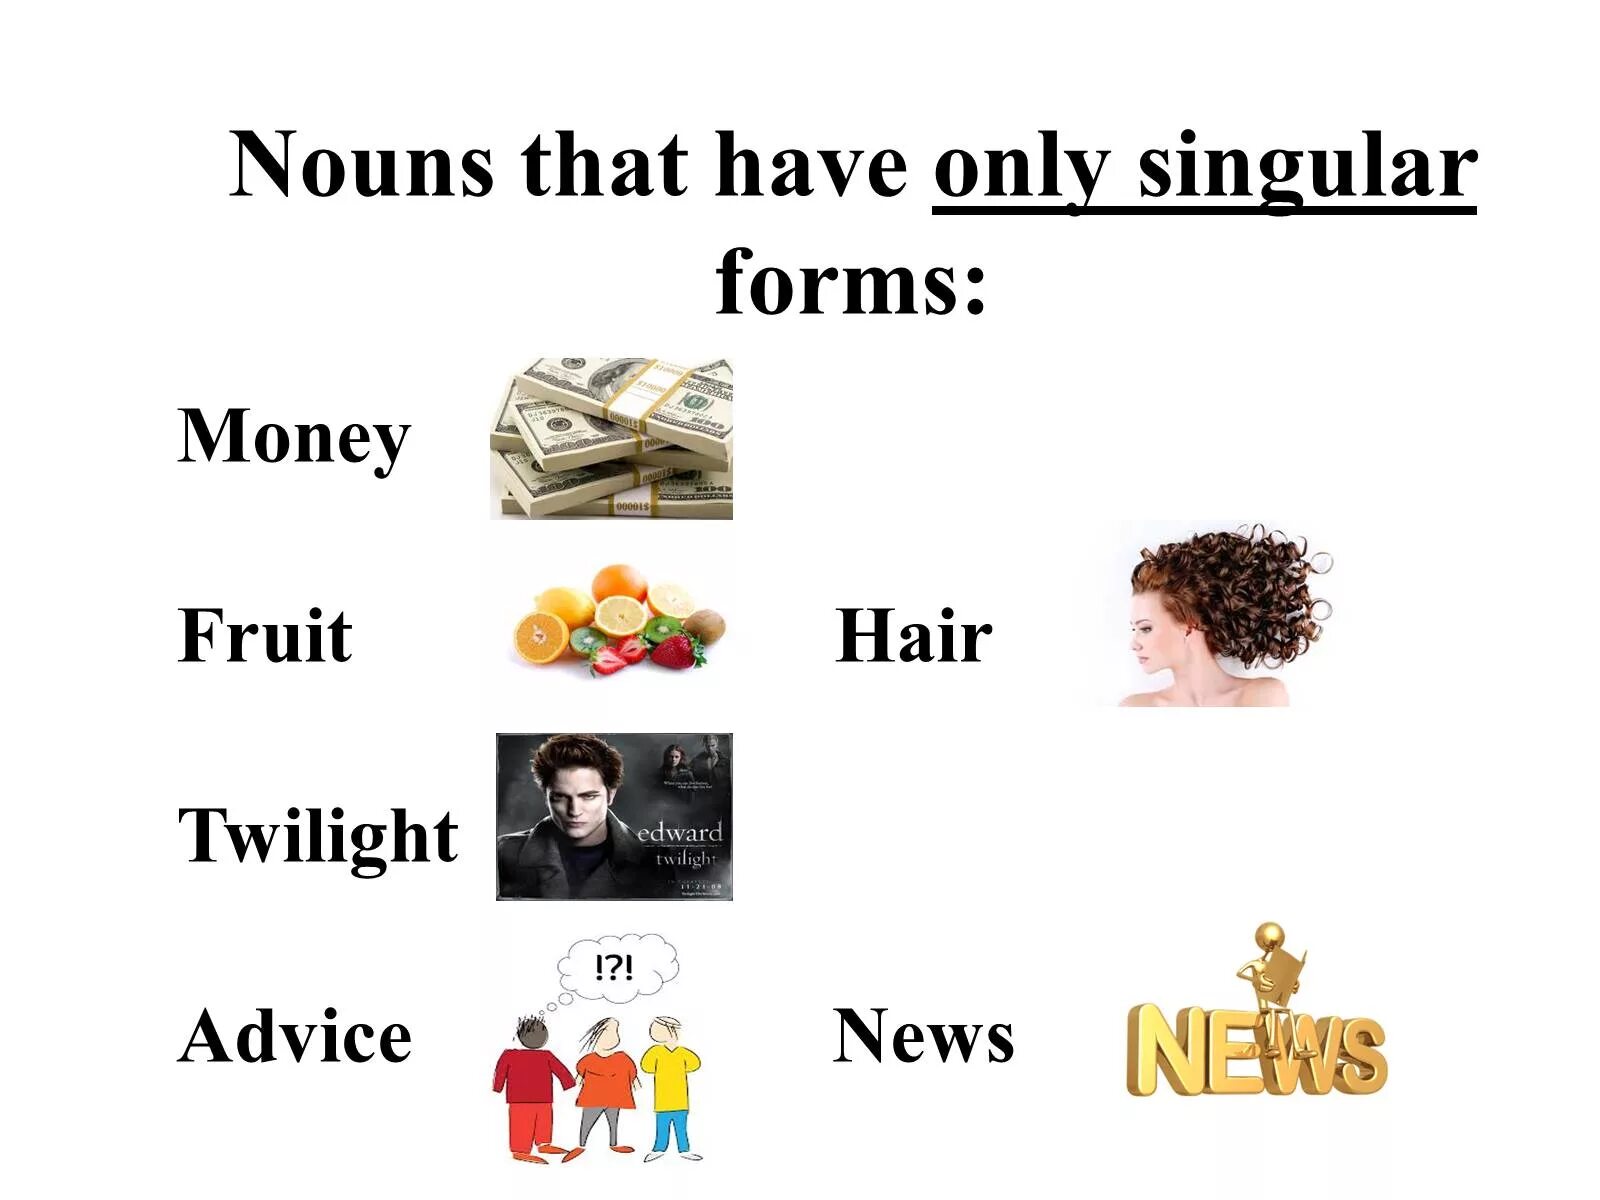 Forms of money. Nouns only in singular. Only singular Nouns. Always singular Nouns. Always singular and plural Nouns.